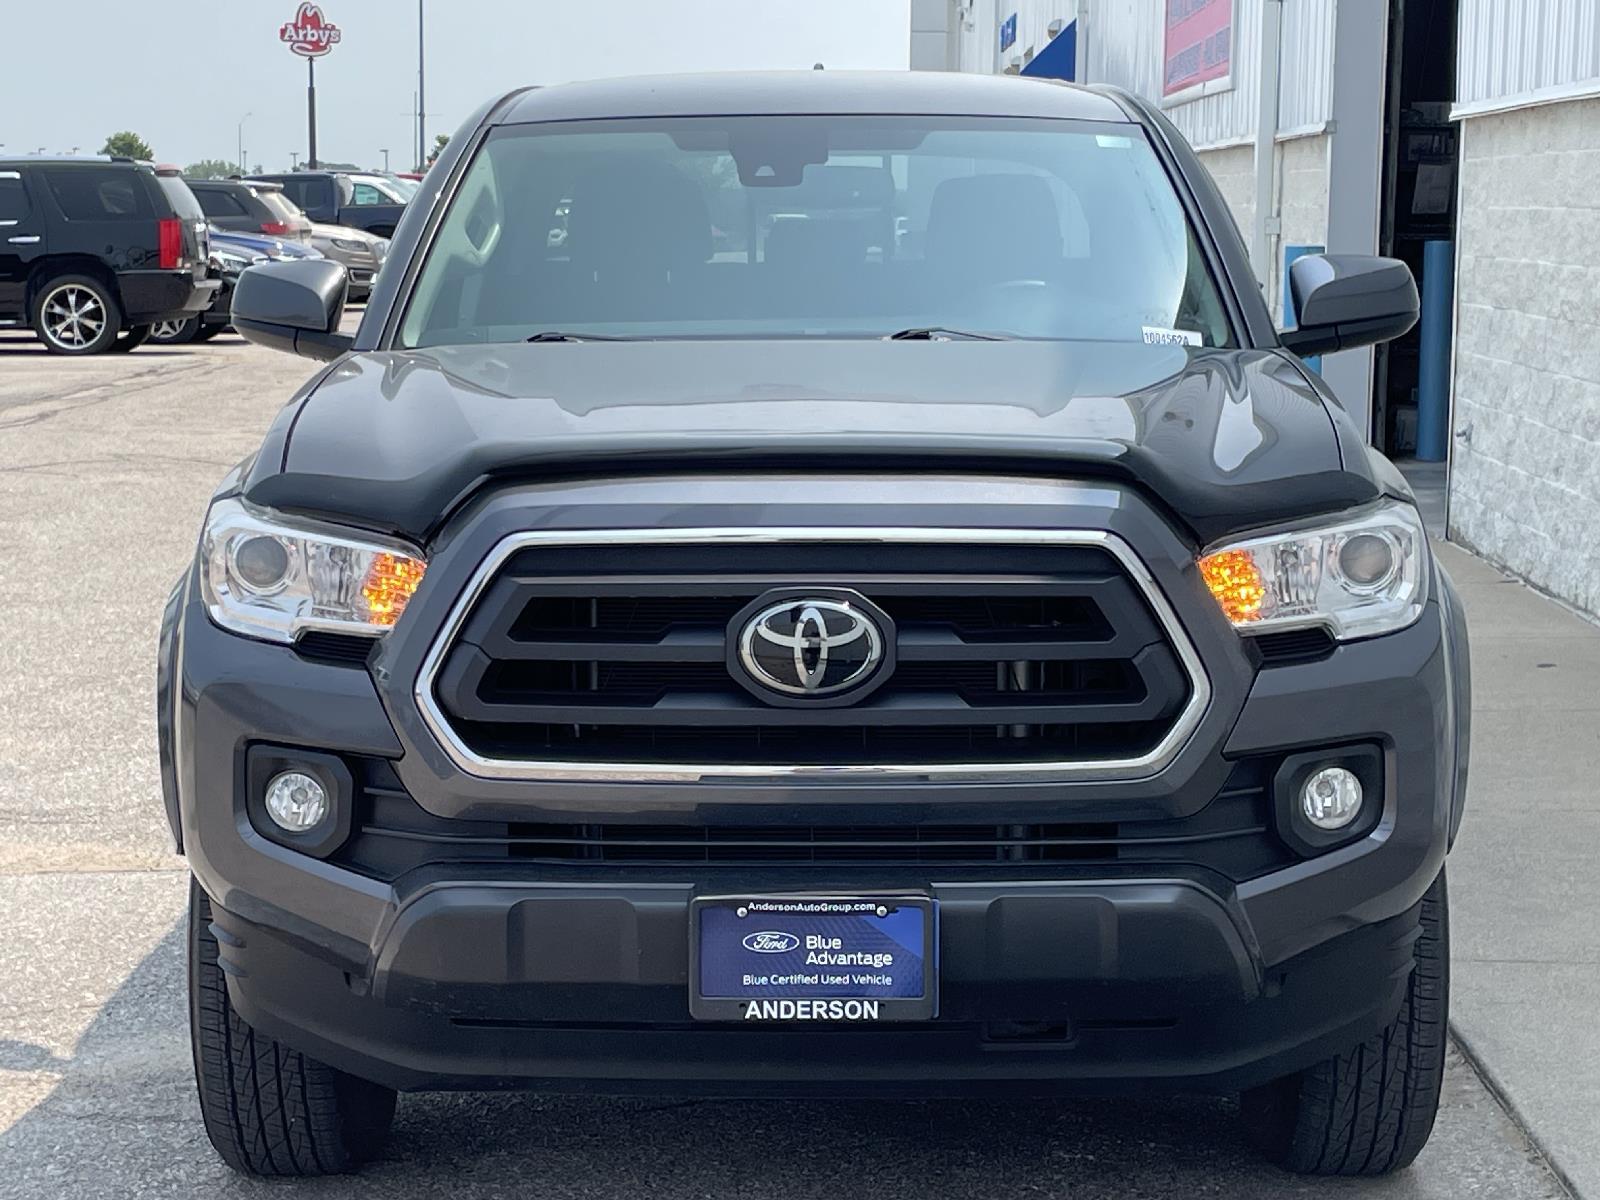 Used 2021 Toyota Tacoma 4WD SR5 Double Cab Truck for sale in Lincoln NE